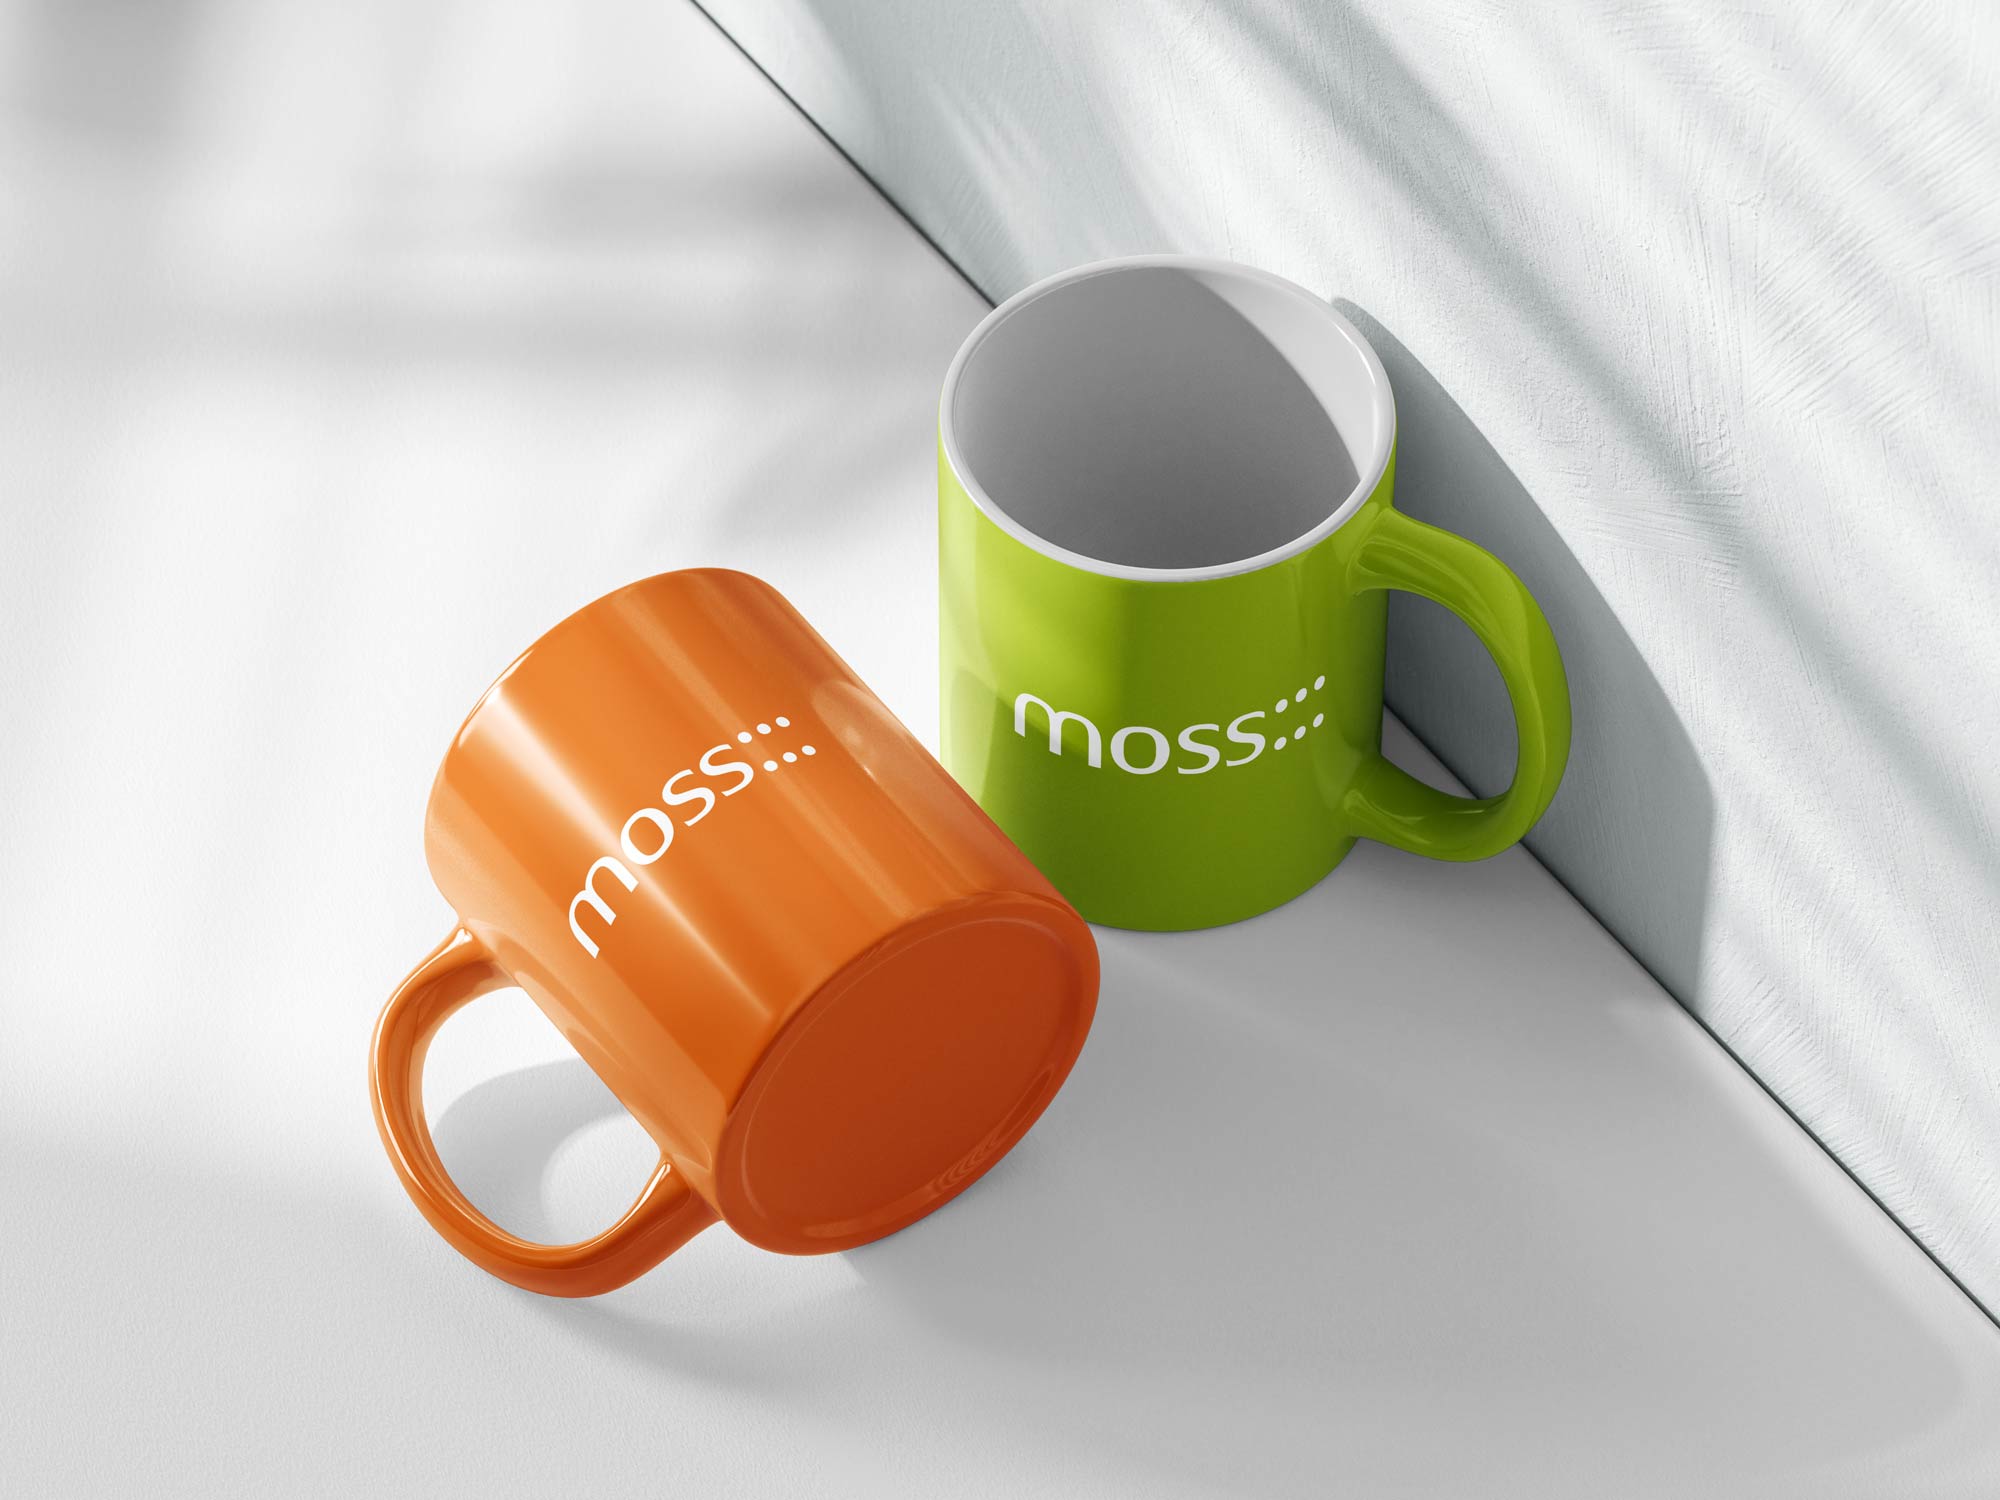 Two coffee mugs featuring an architecture firm logo.